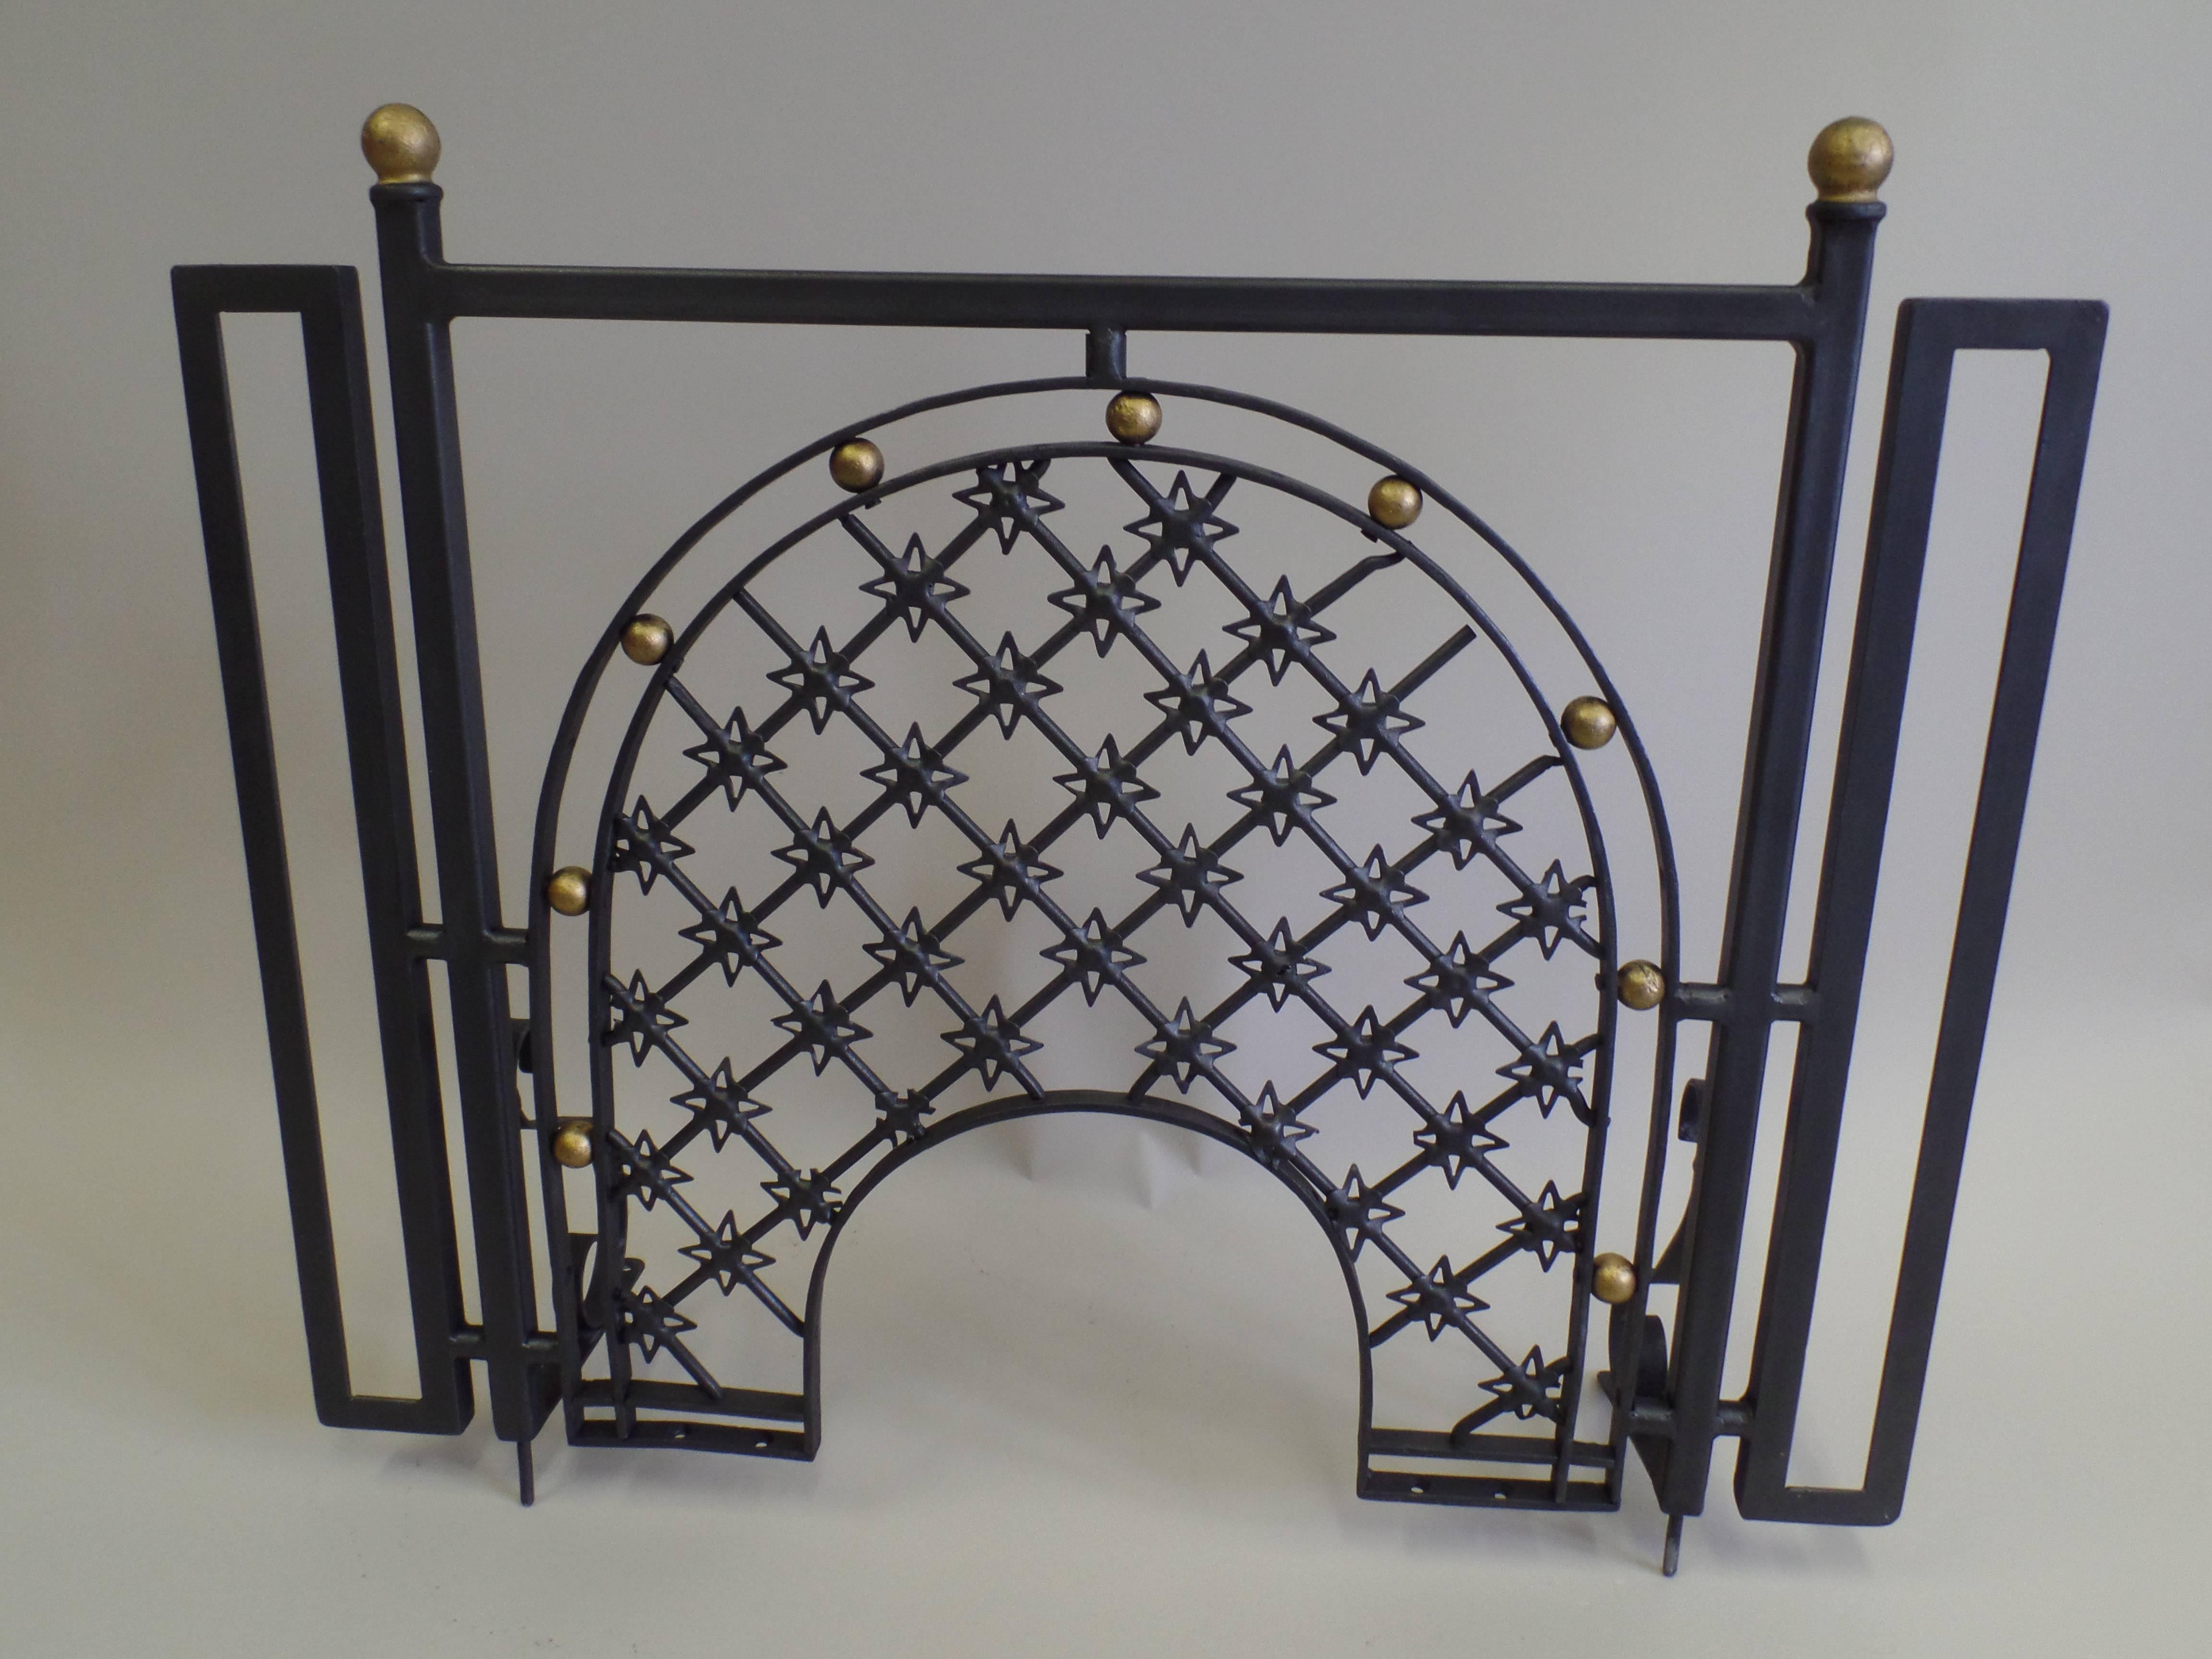 Pair of French Mid-Century Modern Neoclassical Firescreens attributed to French master iron worker, Gilbert Poillerat. The screens are delicately fabricated with a sober, linear frame with the central part of the screen decorated in the form of